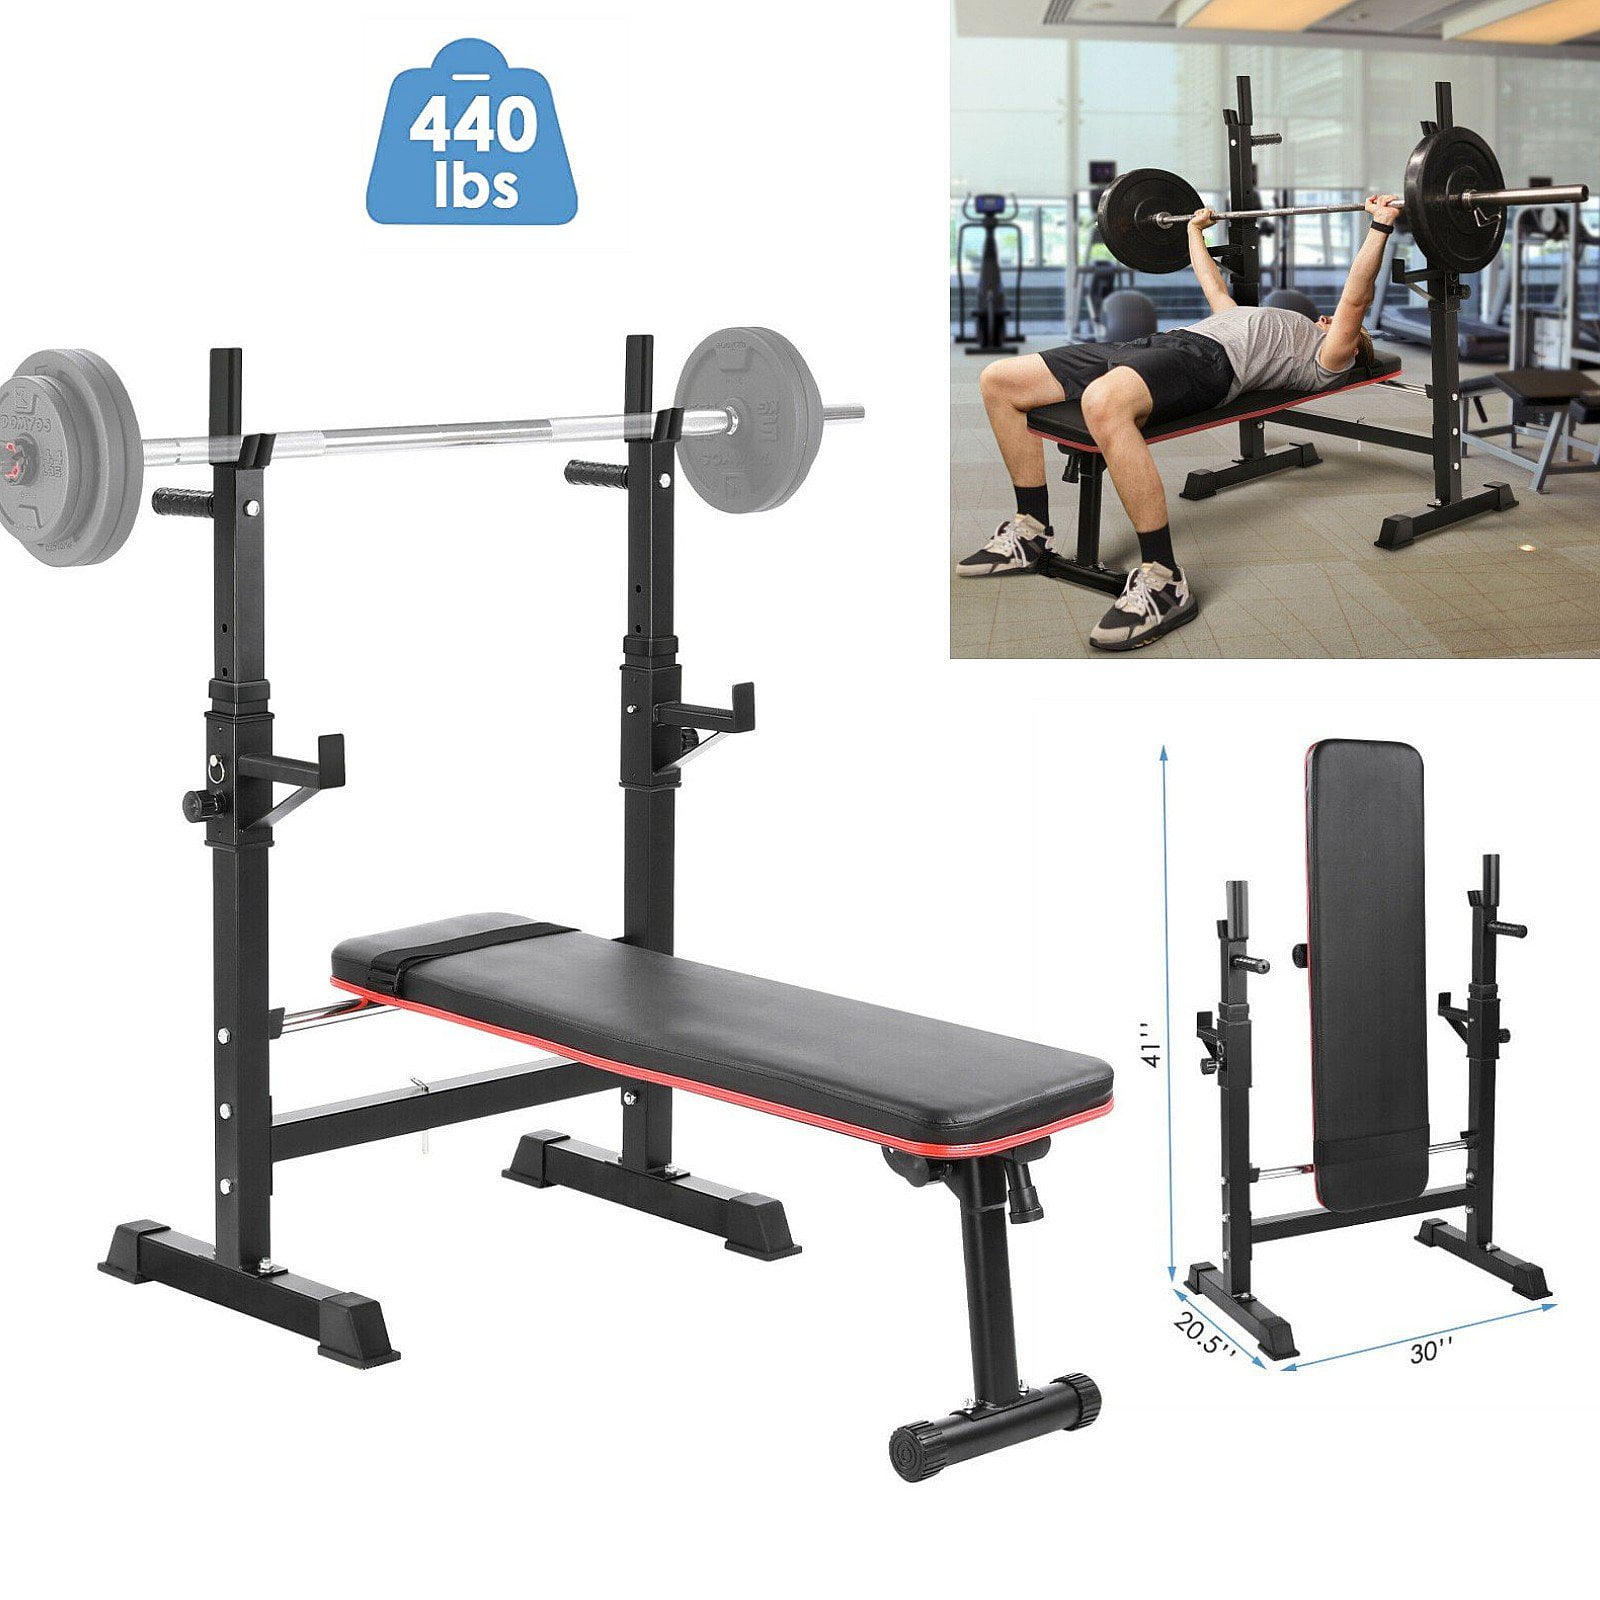 Weight Bench Set Adjustable Home Gym Press Lifting Barbell Exercise Workout 